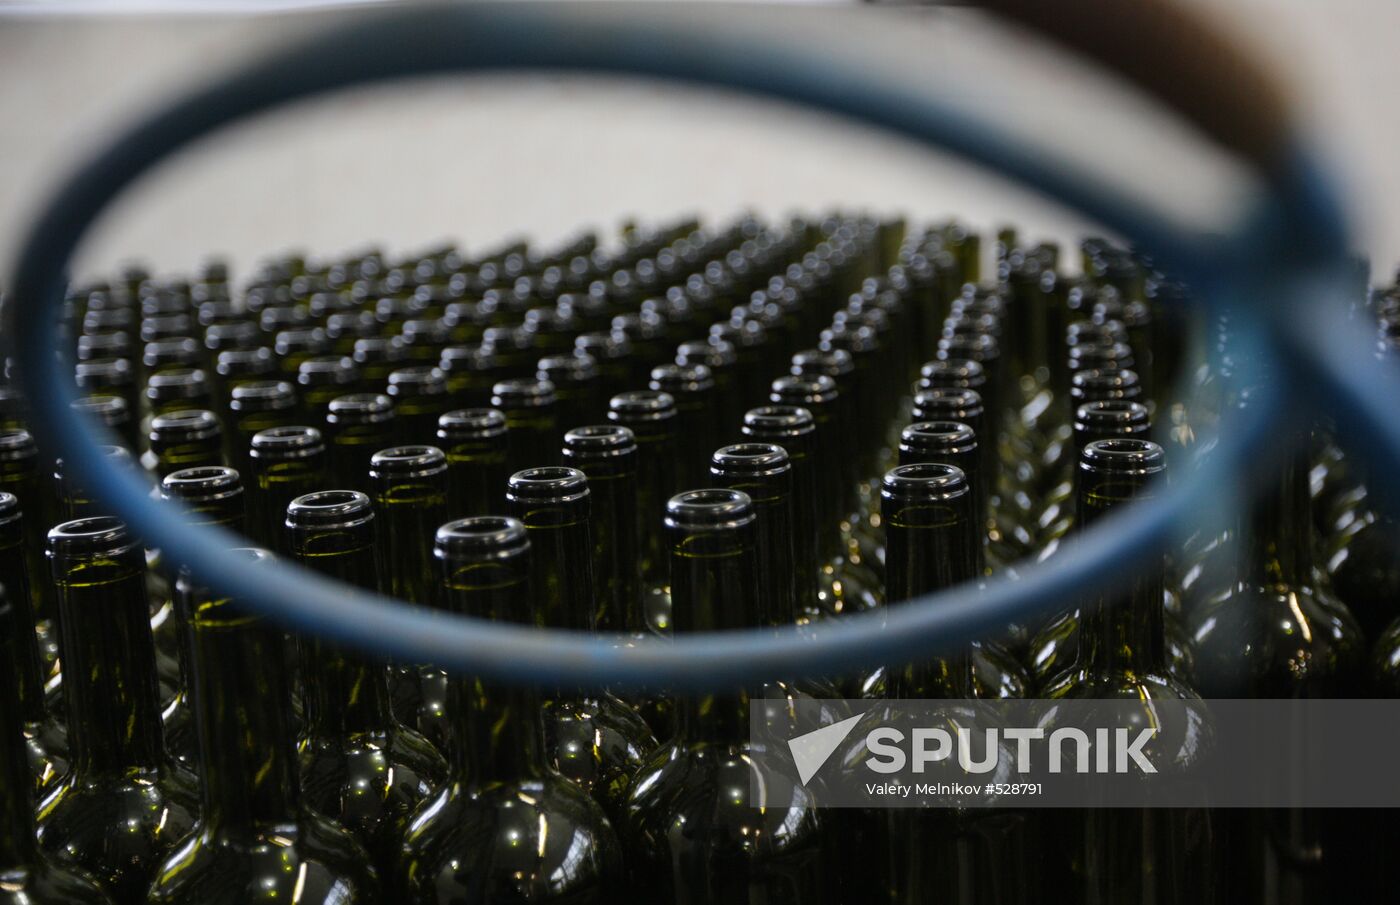 Wines and Beverages of Abkhazia production facility in Sukhumi